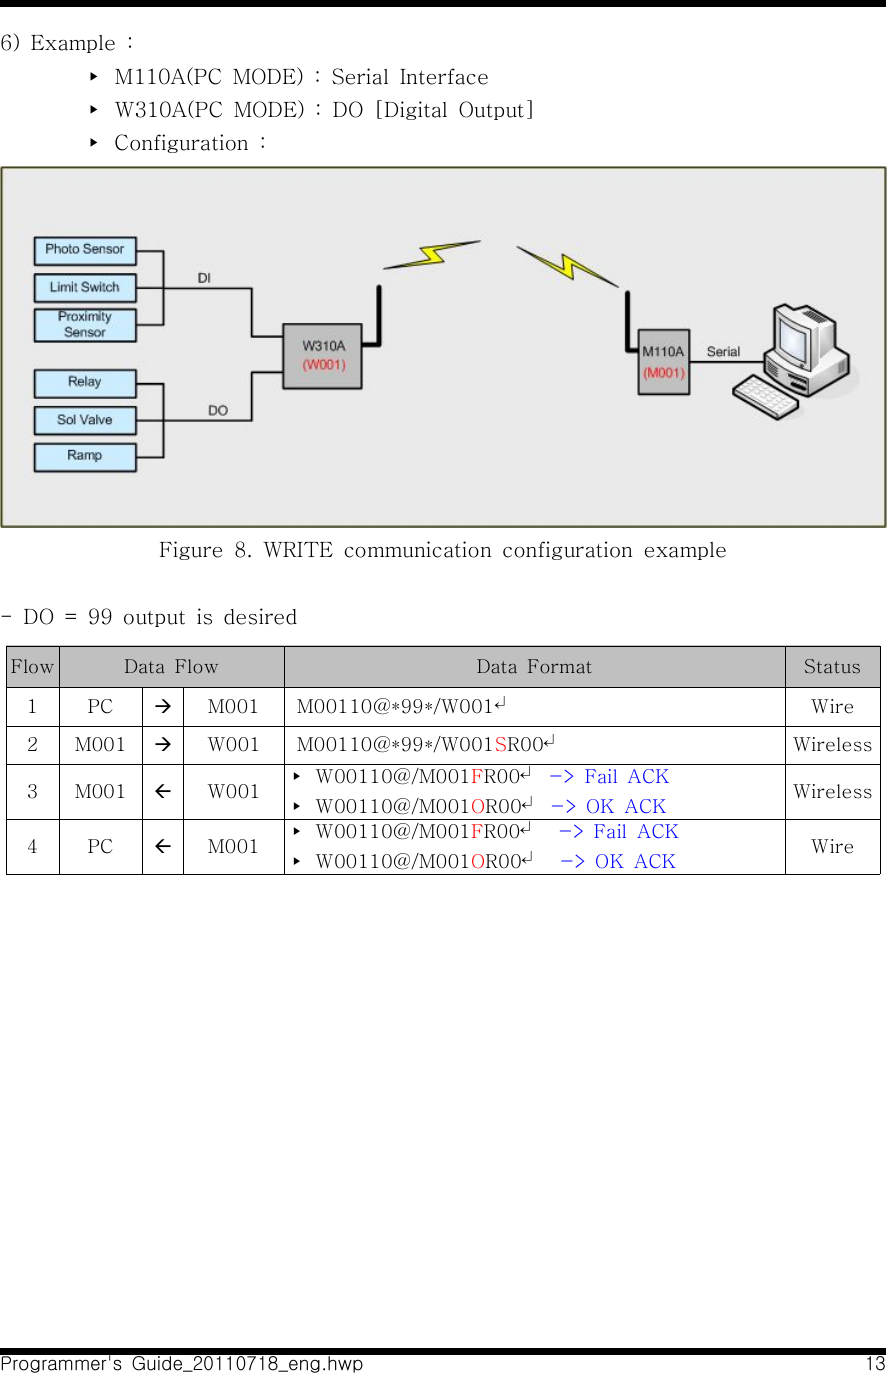 Programmer&apos;s  Guide_20110718_eng.hwp 136)  Example  :▸  M110A(PC  MODE)  :  Serial  Interface▸  W310A(PC  MODE)  :  DO  [Digital  Output]▸  Configuration  :Figure  8.  WRITE  communication  configuration  example-  DO  =  99  output  is  desiredFlow Data  Flow Data  Format Status1 PC àM001   M00110@*99*/W001↵Wire2 M001 àW001   M00110@*99*/W001SR00↵Wireless3 M001 ßW001 ▸  W00110@/M001FR00↵  -&gt;  Fail  ACK▸  W00110@/M001OR00↵  -&gt;  OK  ACK Wireless4 PC ßM001 ▸  W00110@/M001FR00↵    -&gt;  Fail  ACK ▸  W00110@/M001OR00↵    -&gt;  OK  ACK Wire